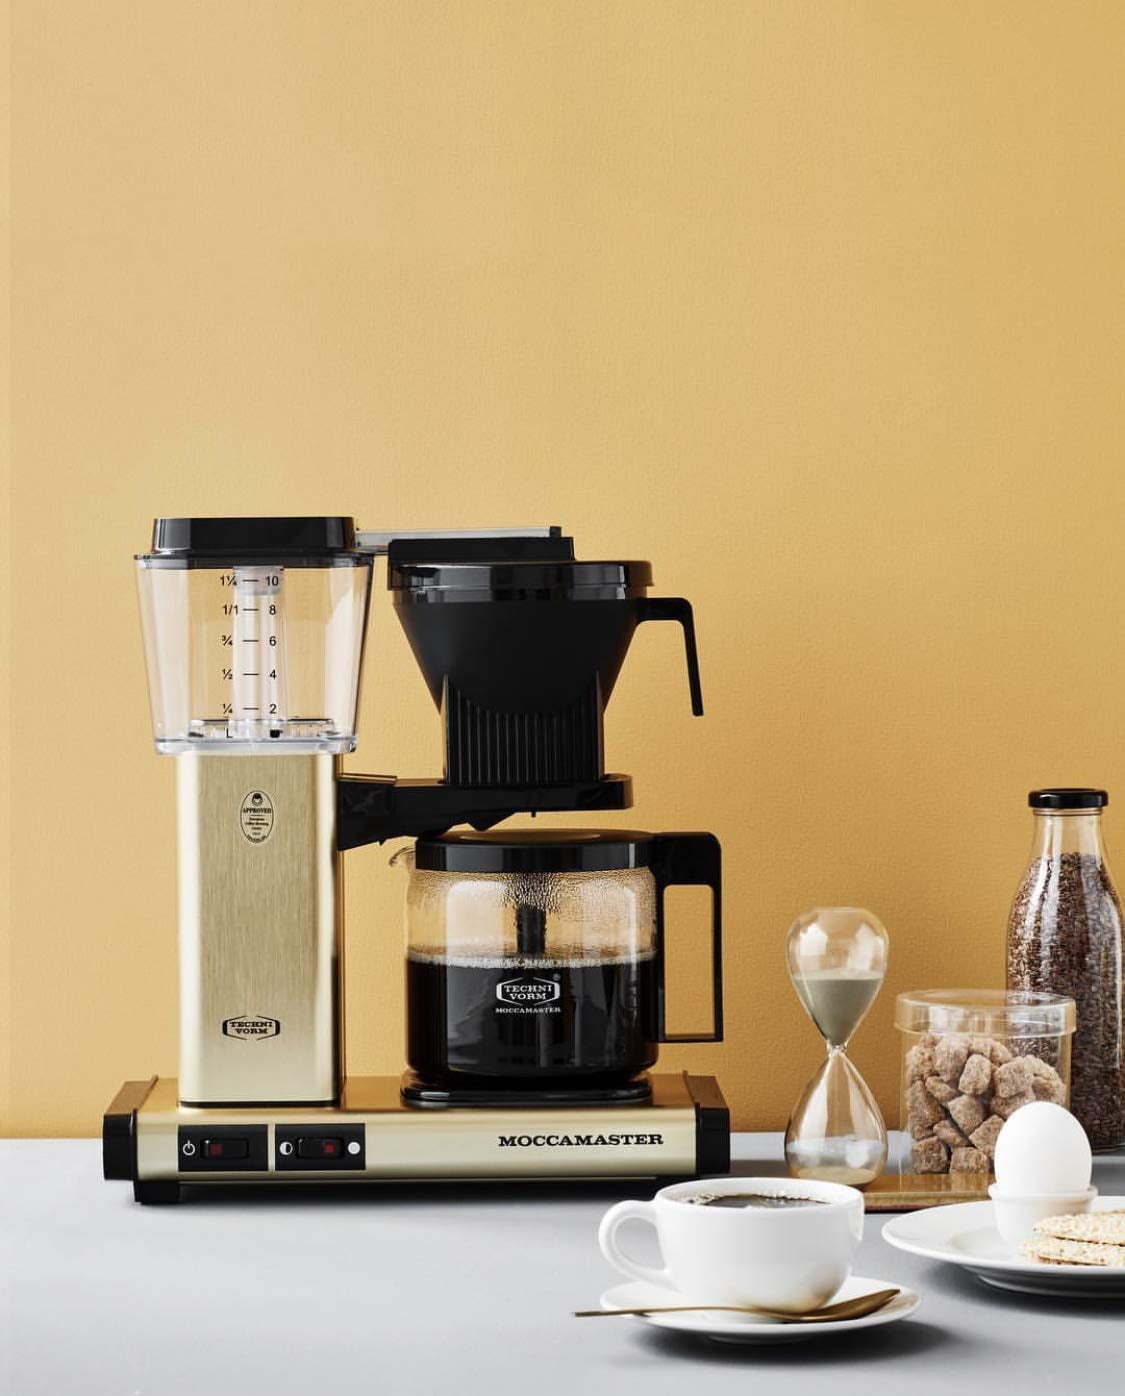 Technivorm KBG Coffee Brewer on Sale at  2019